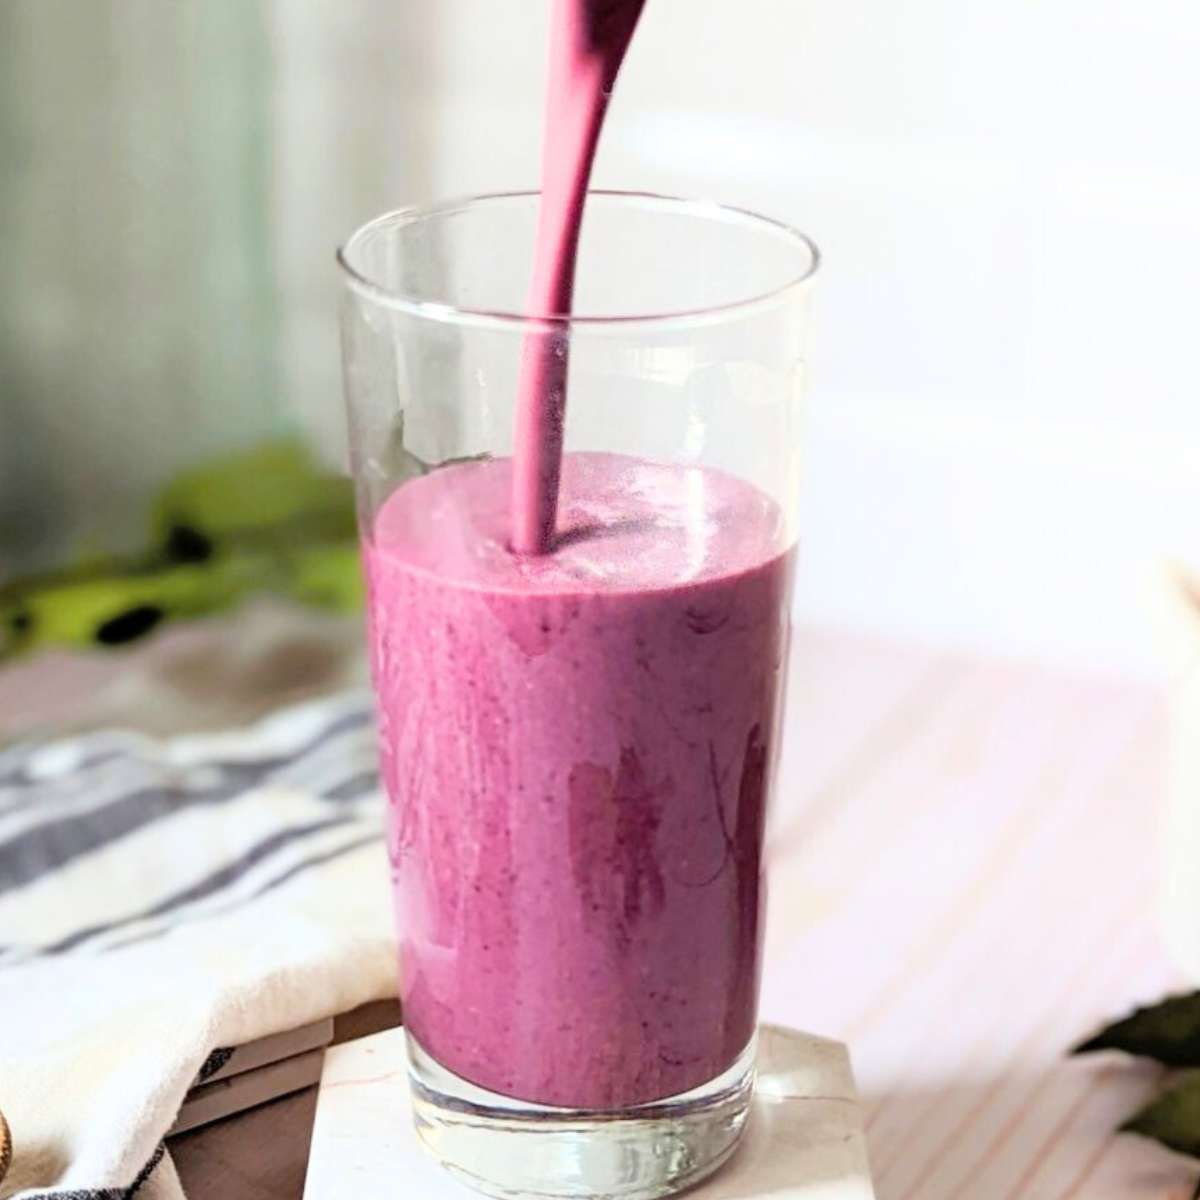 blueberry oatmeal smoothie being poured into a large glass from a vitamix blender.